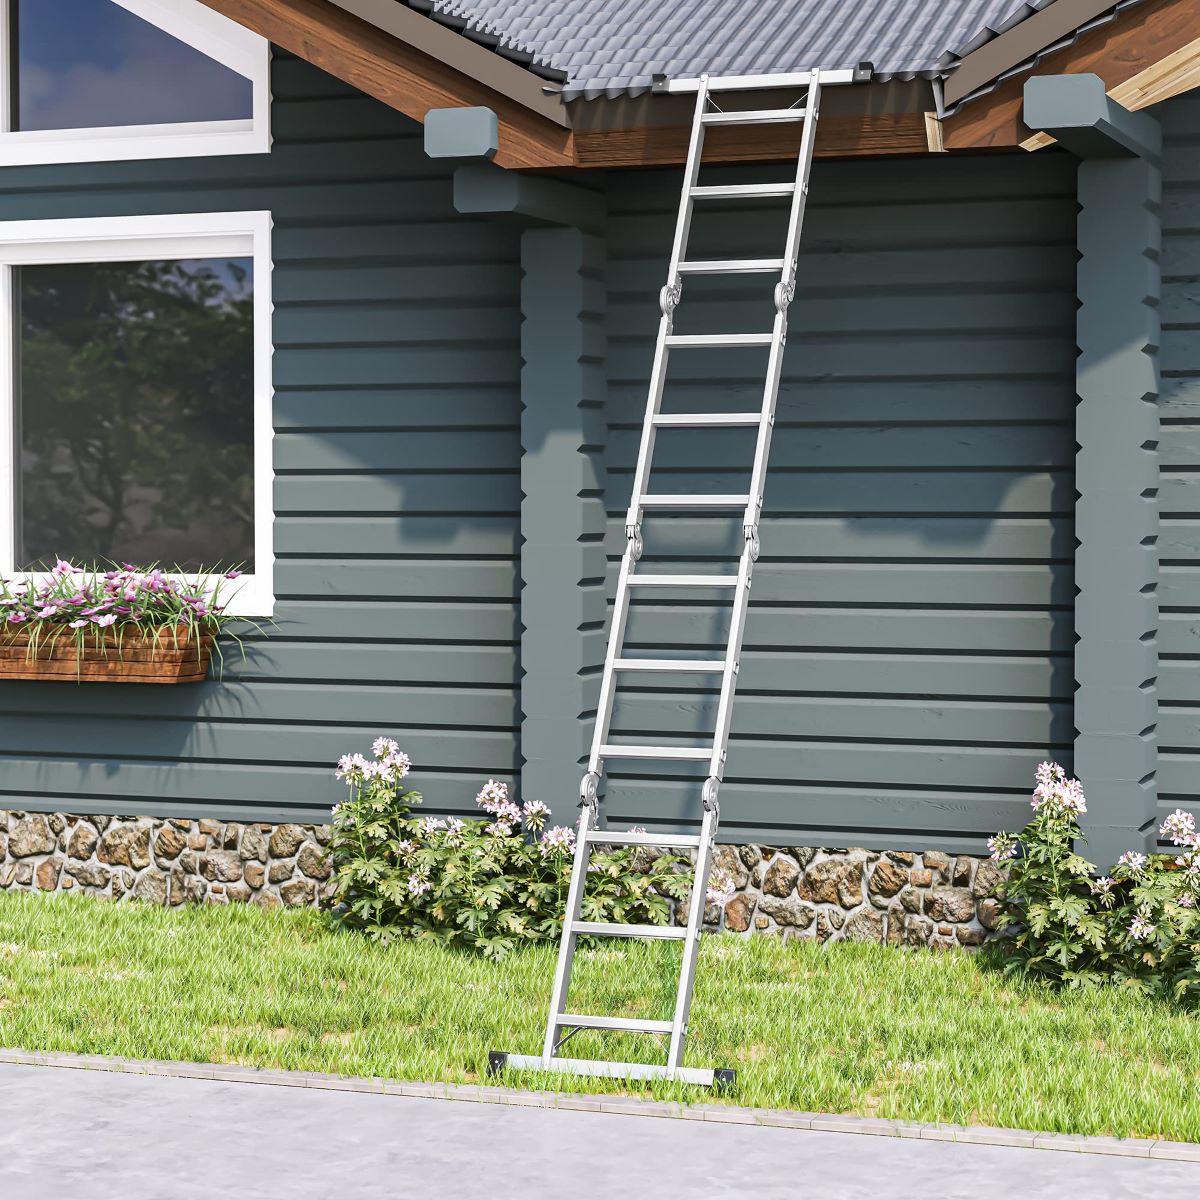 How To Lean Ladder Against House